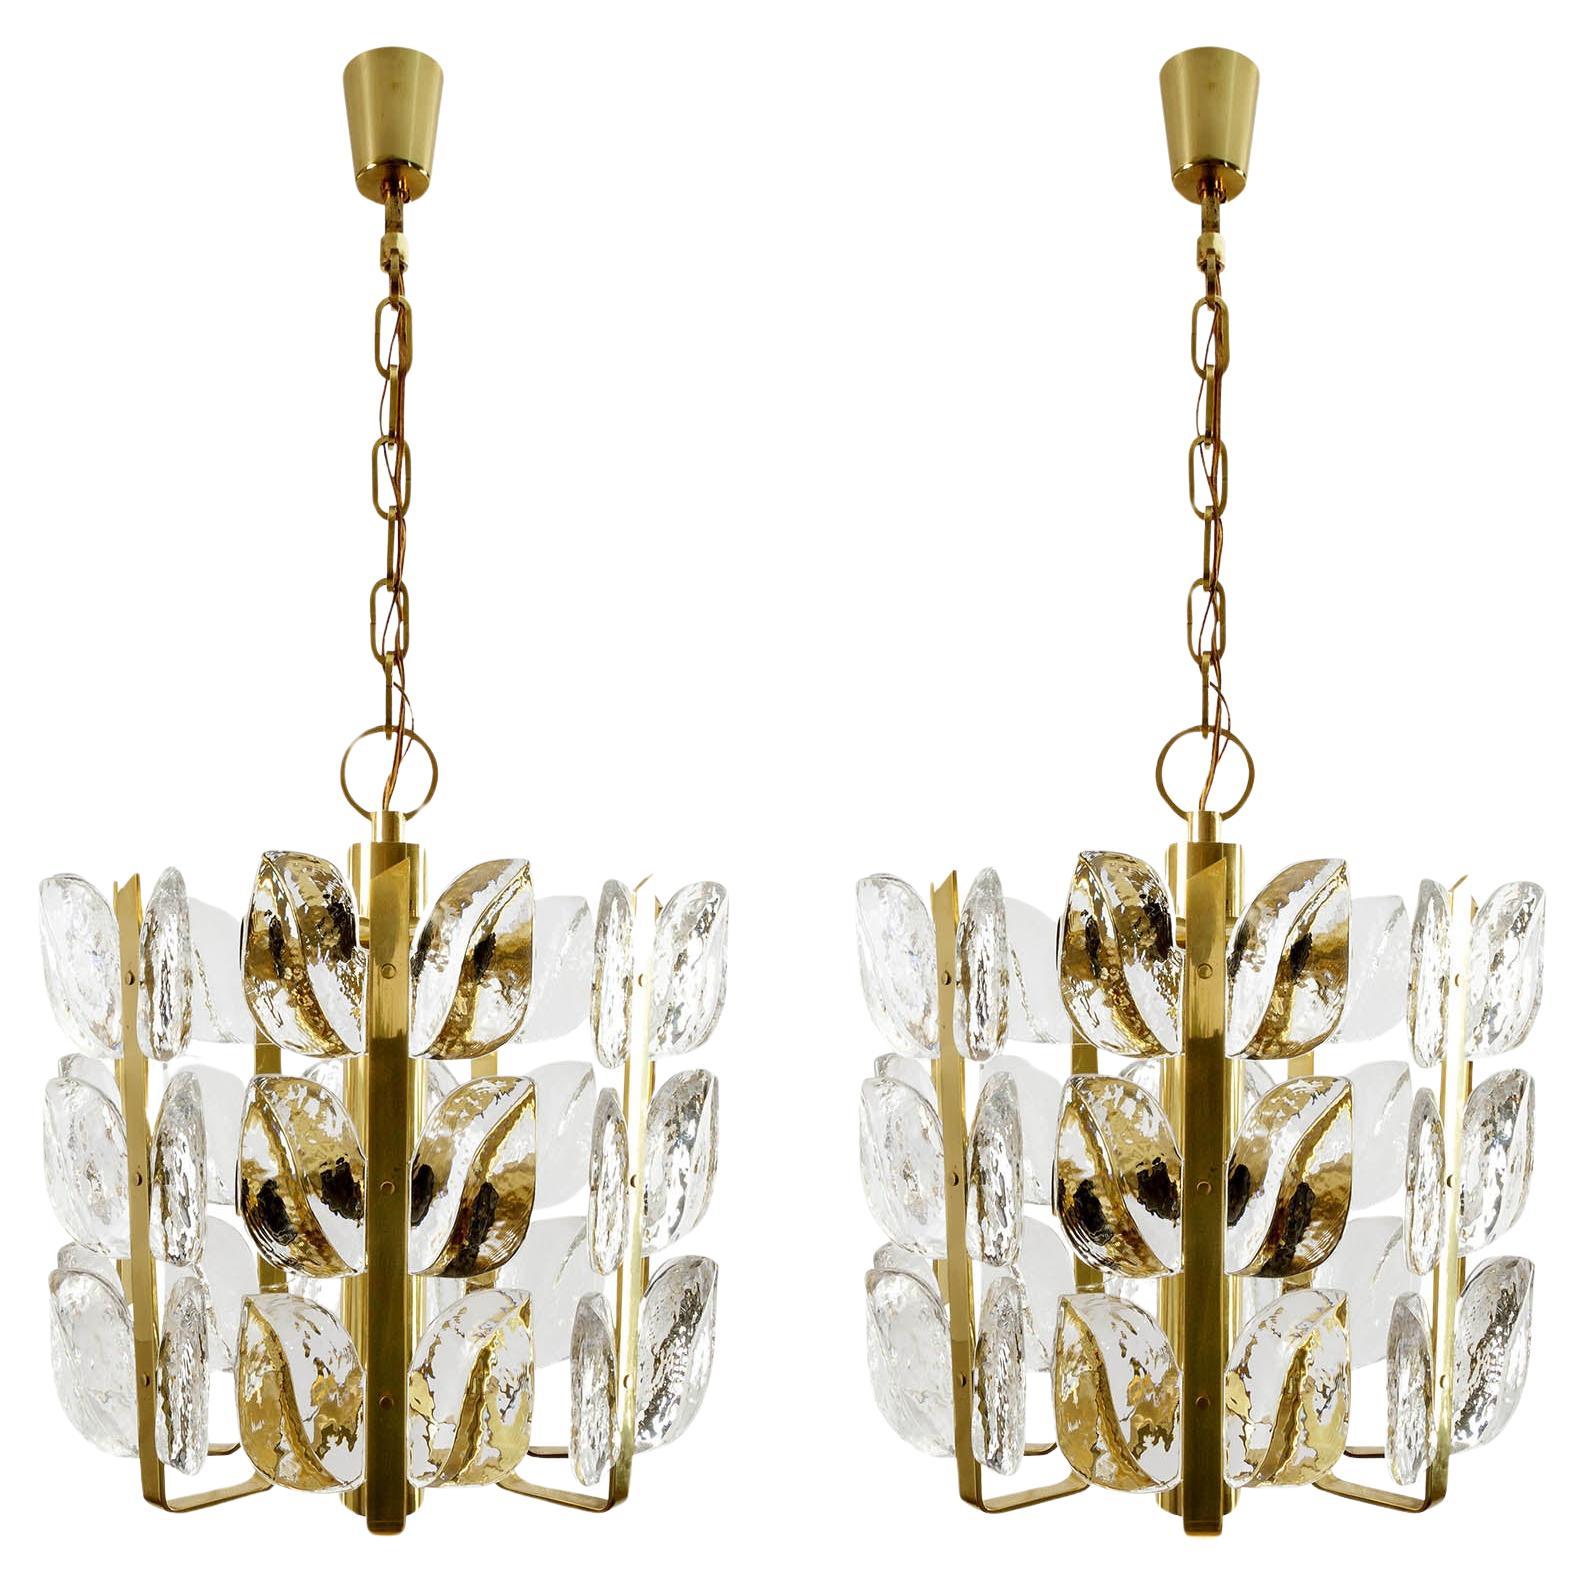 One of Two Kalmar Chandeliers or Pendant Lights 'Florida', Glass and Brass, 1970